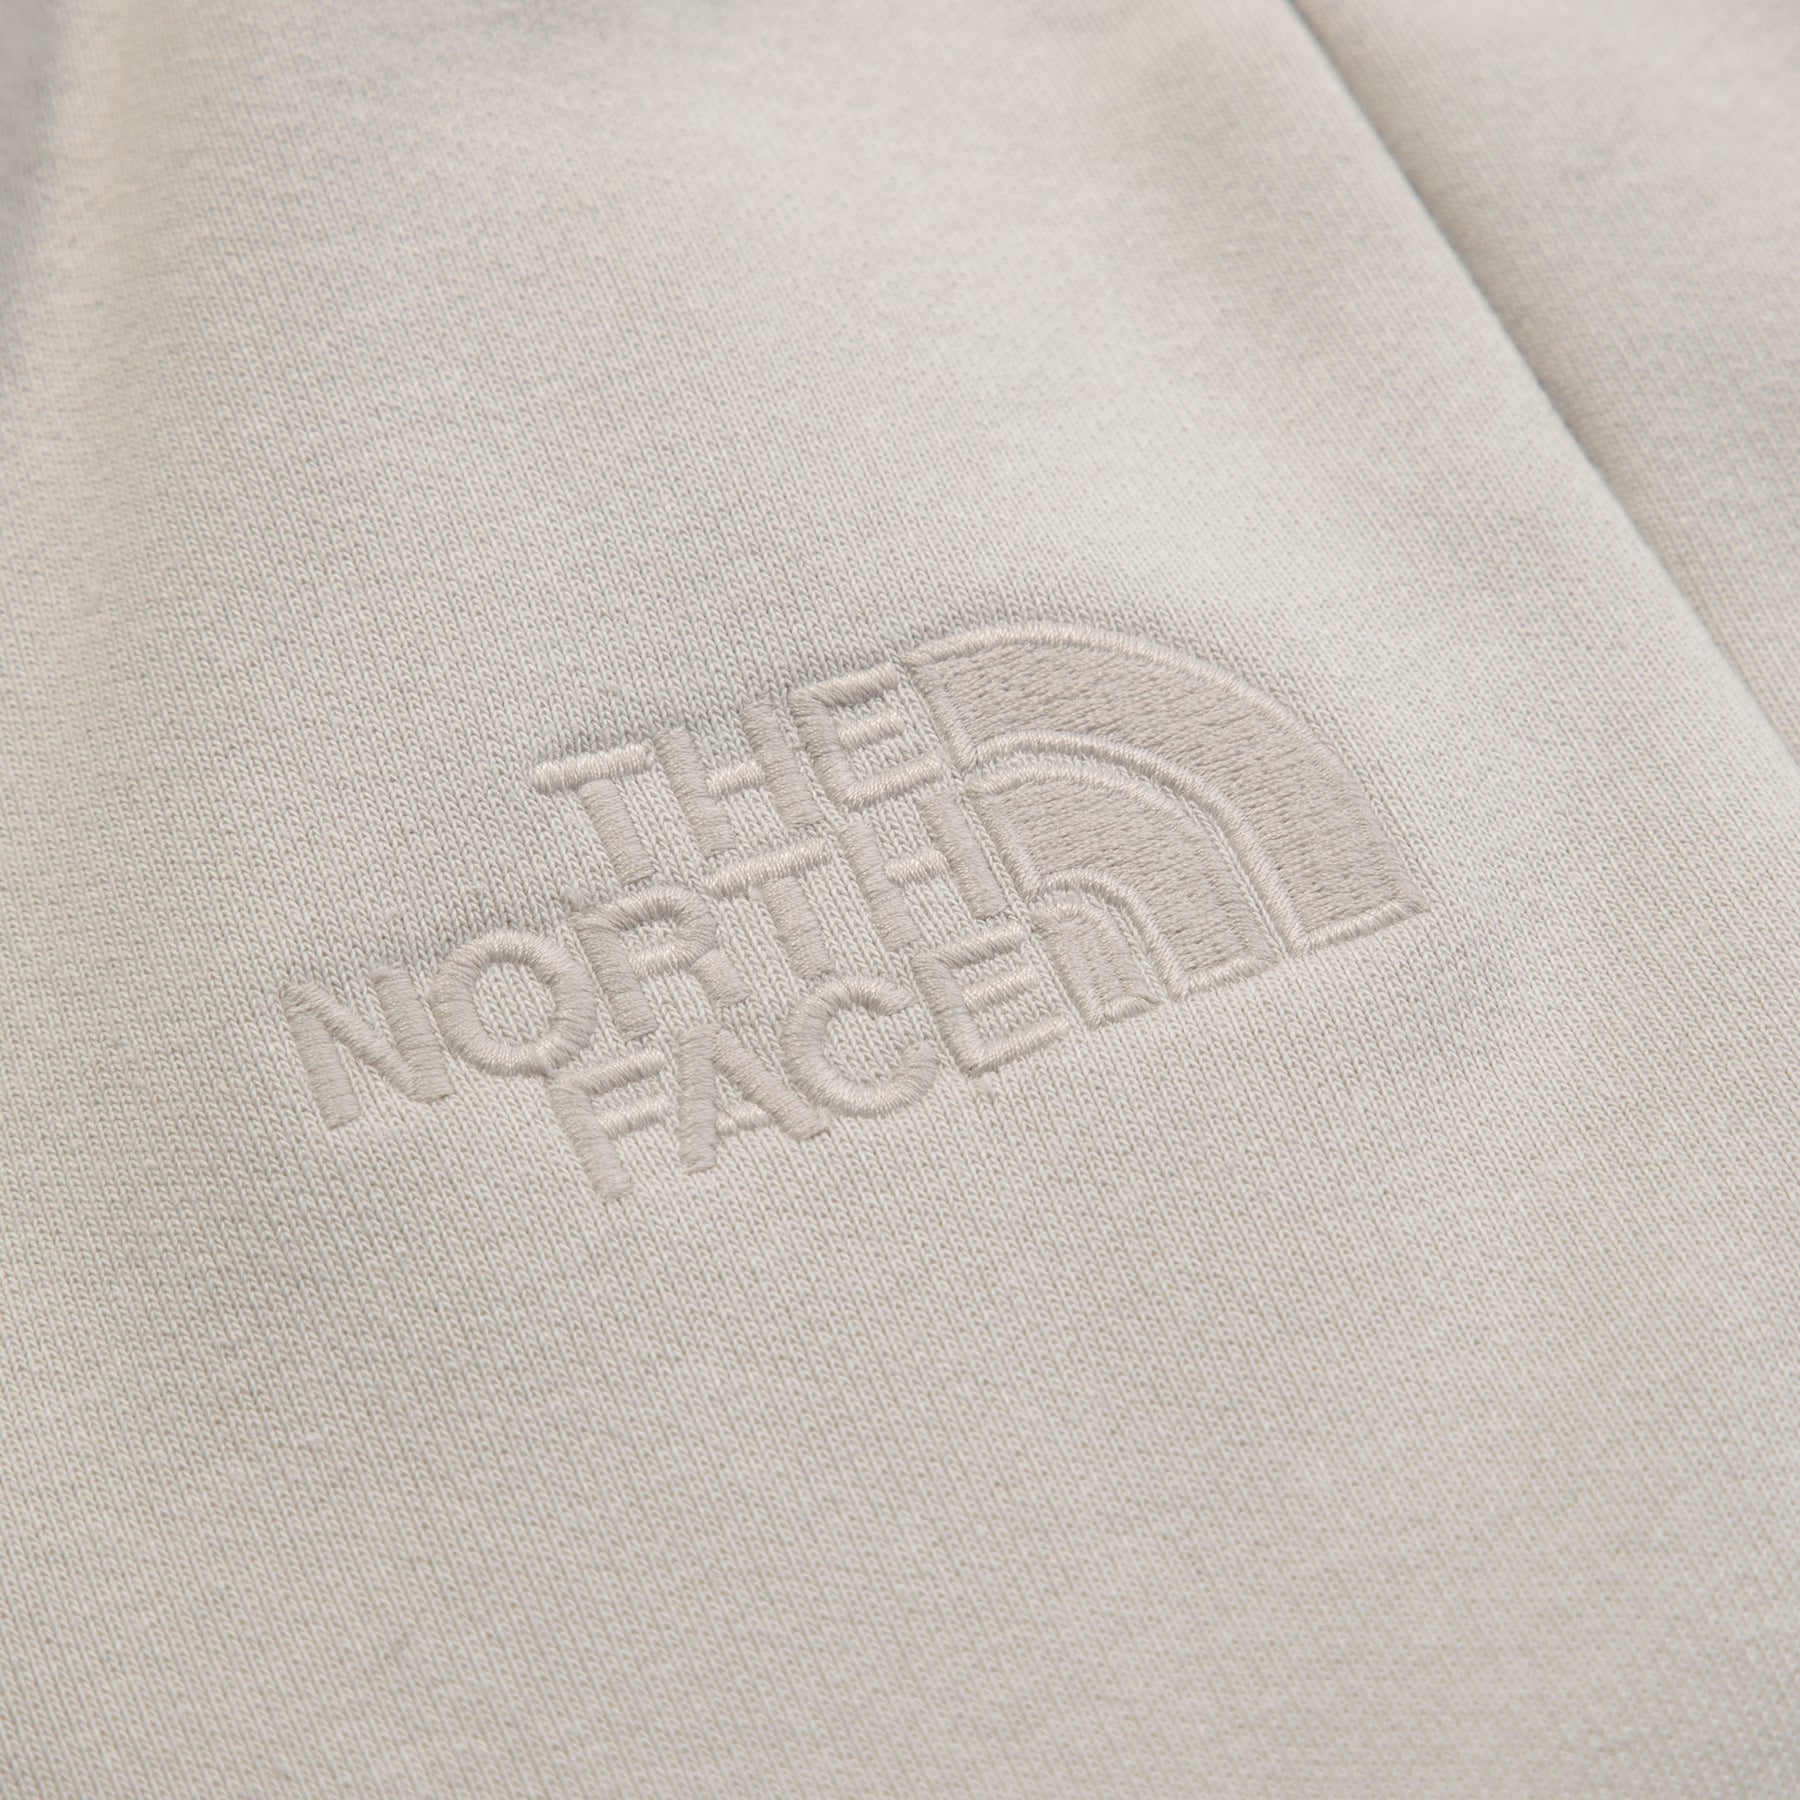 The North Face x KAWS Sweatpant (Moonlight Ivory)